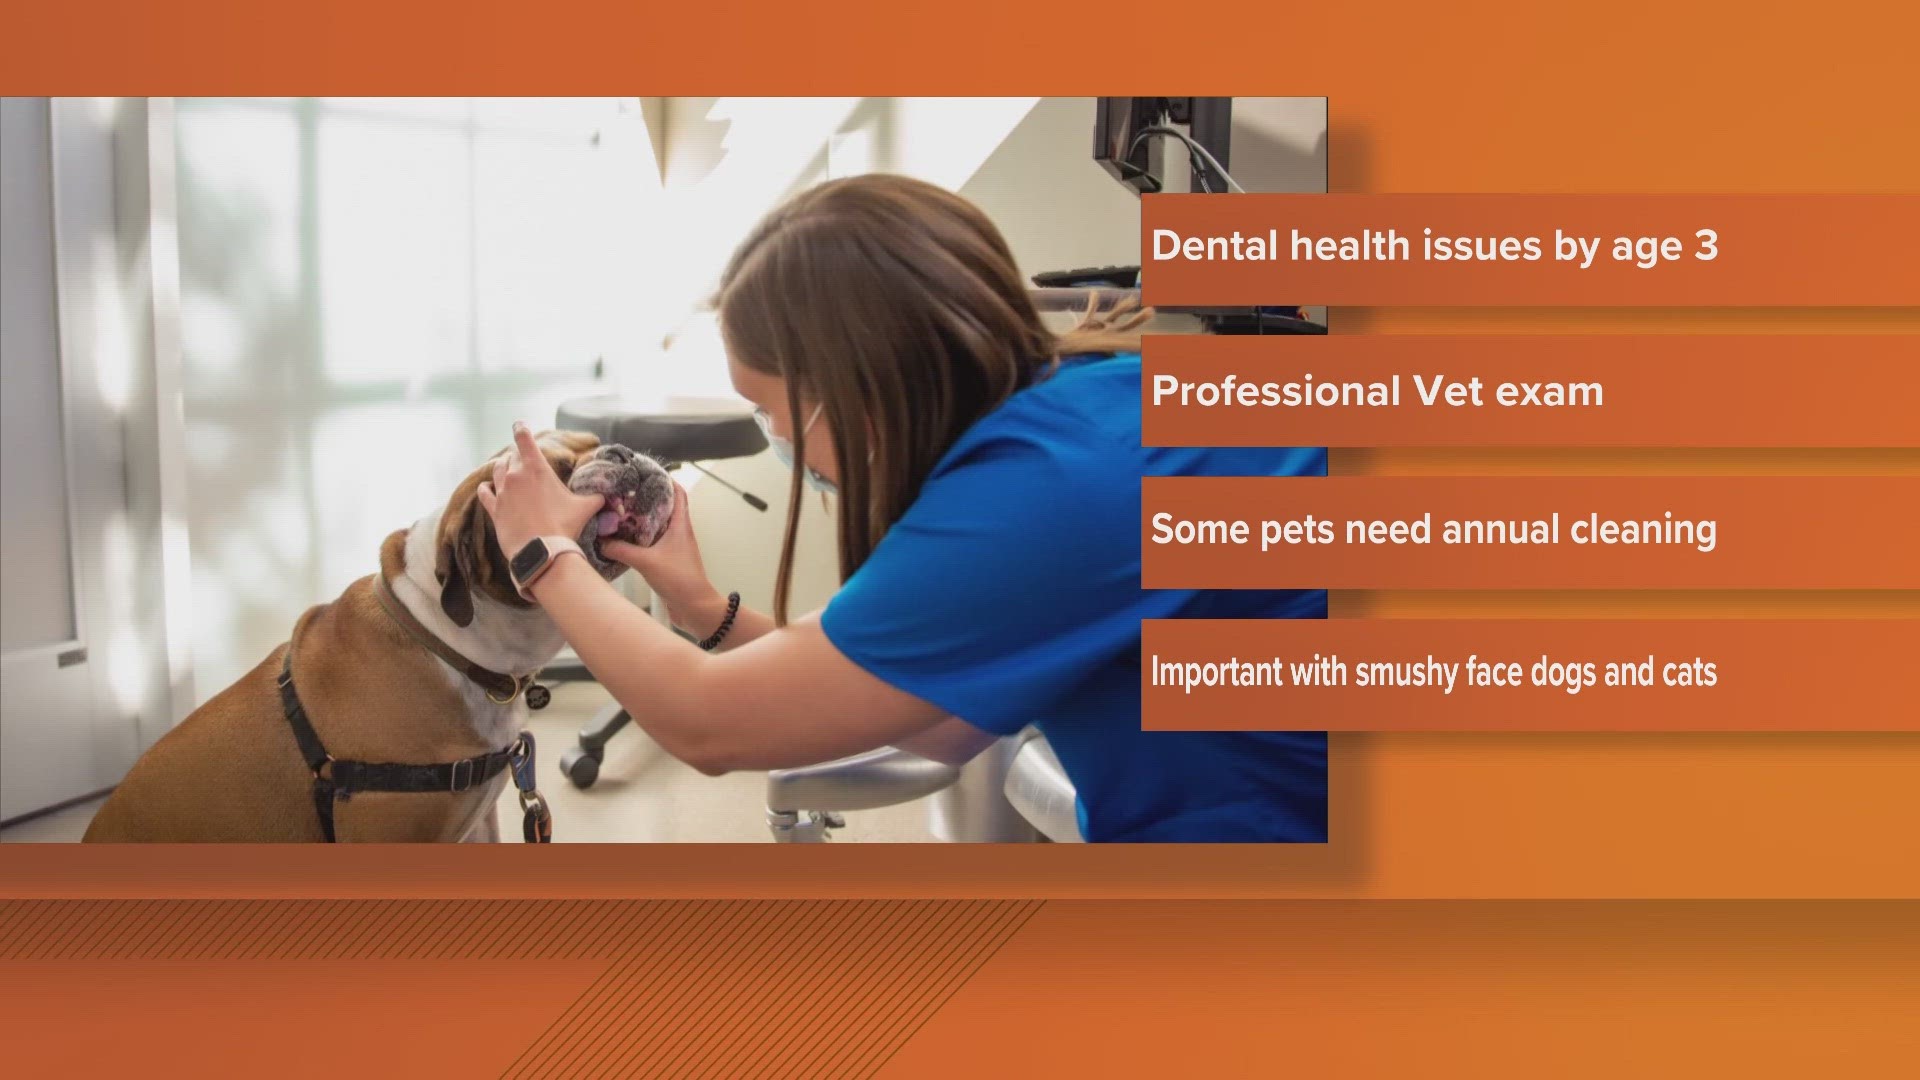 Dr. David Liss with Goodheart Animal Health Center discusses the importance of cleaning your pet's teeth during National Pet Dental Health Month.